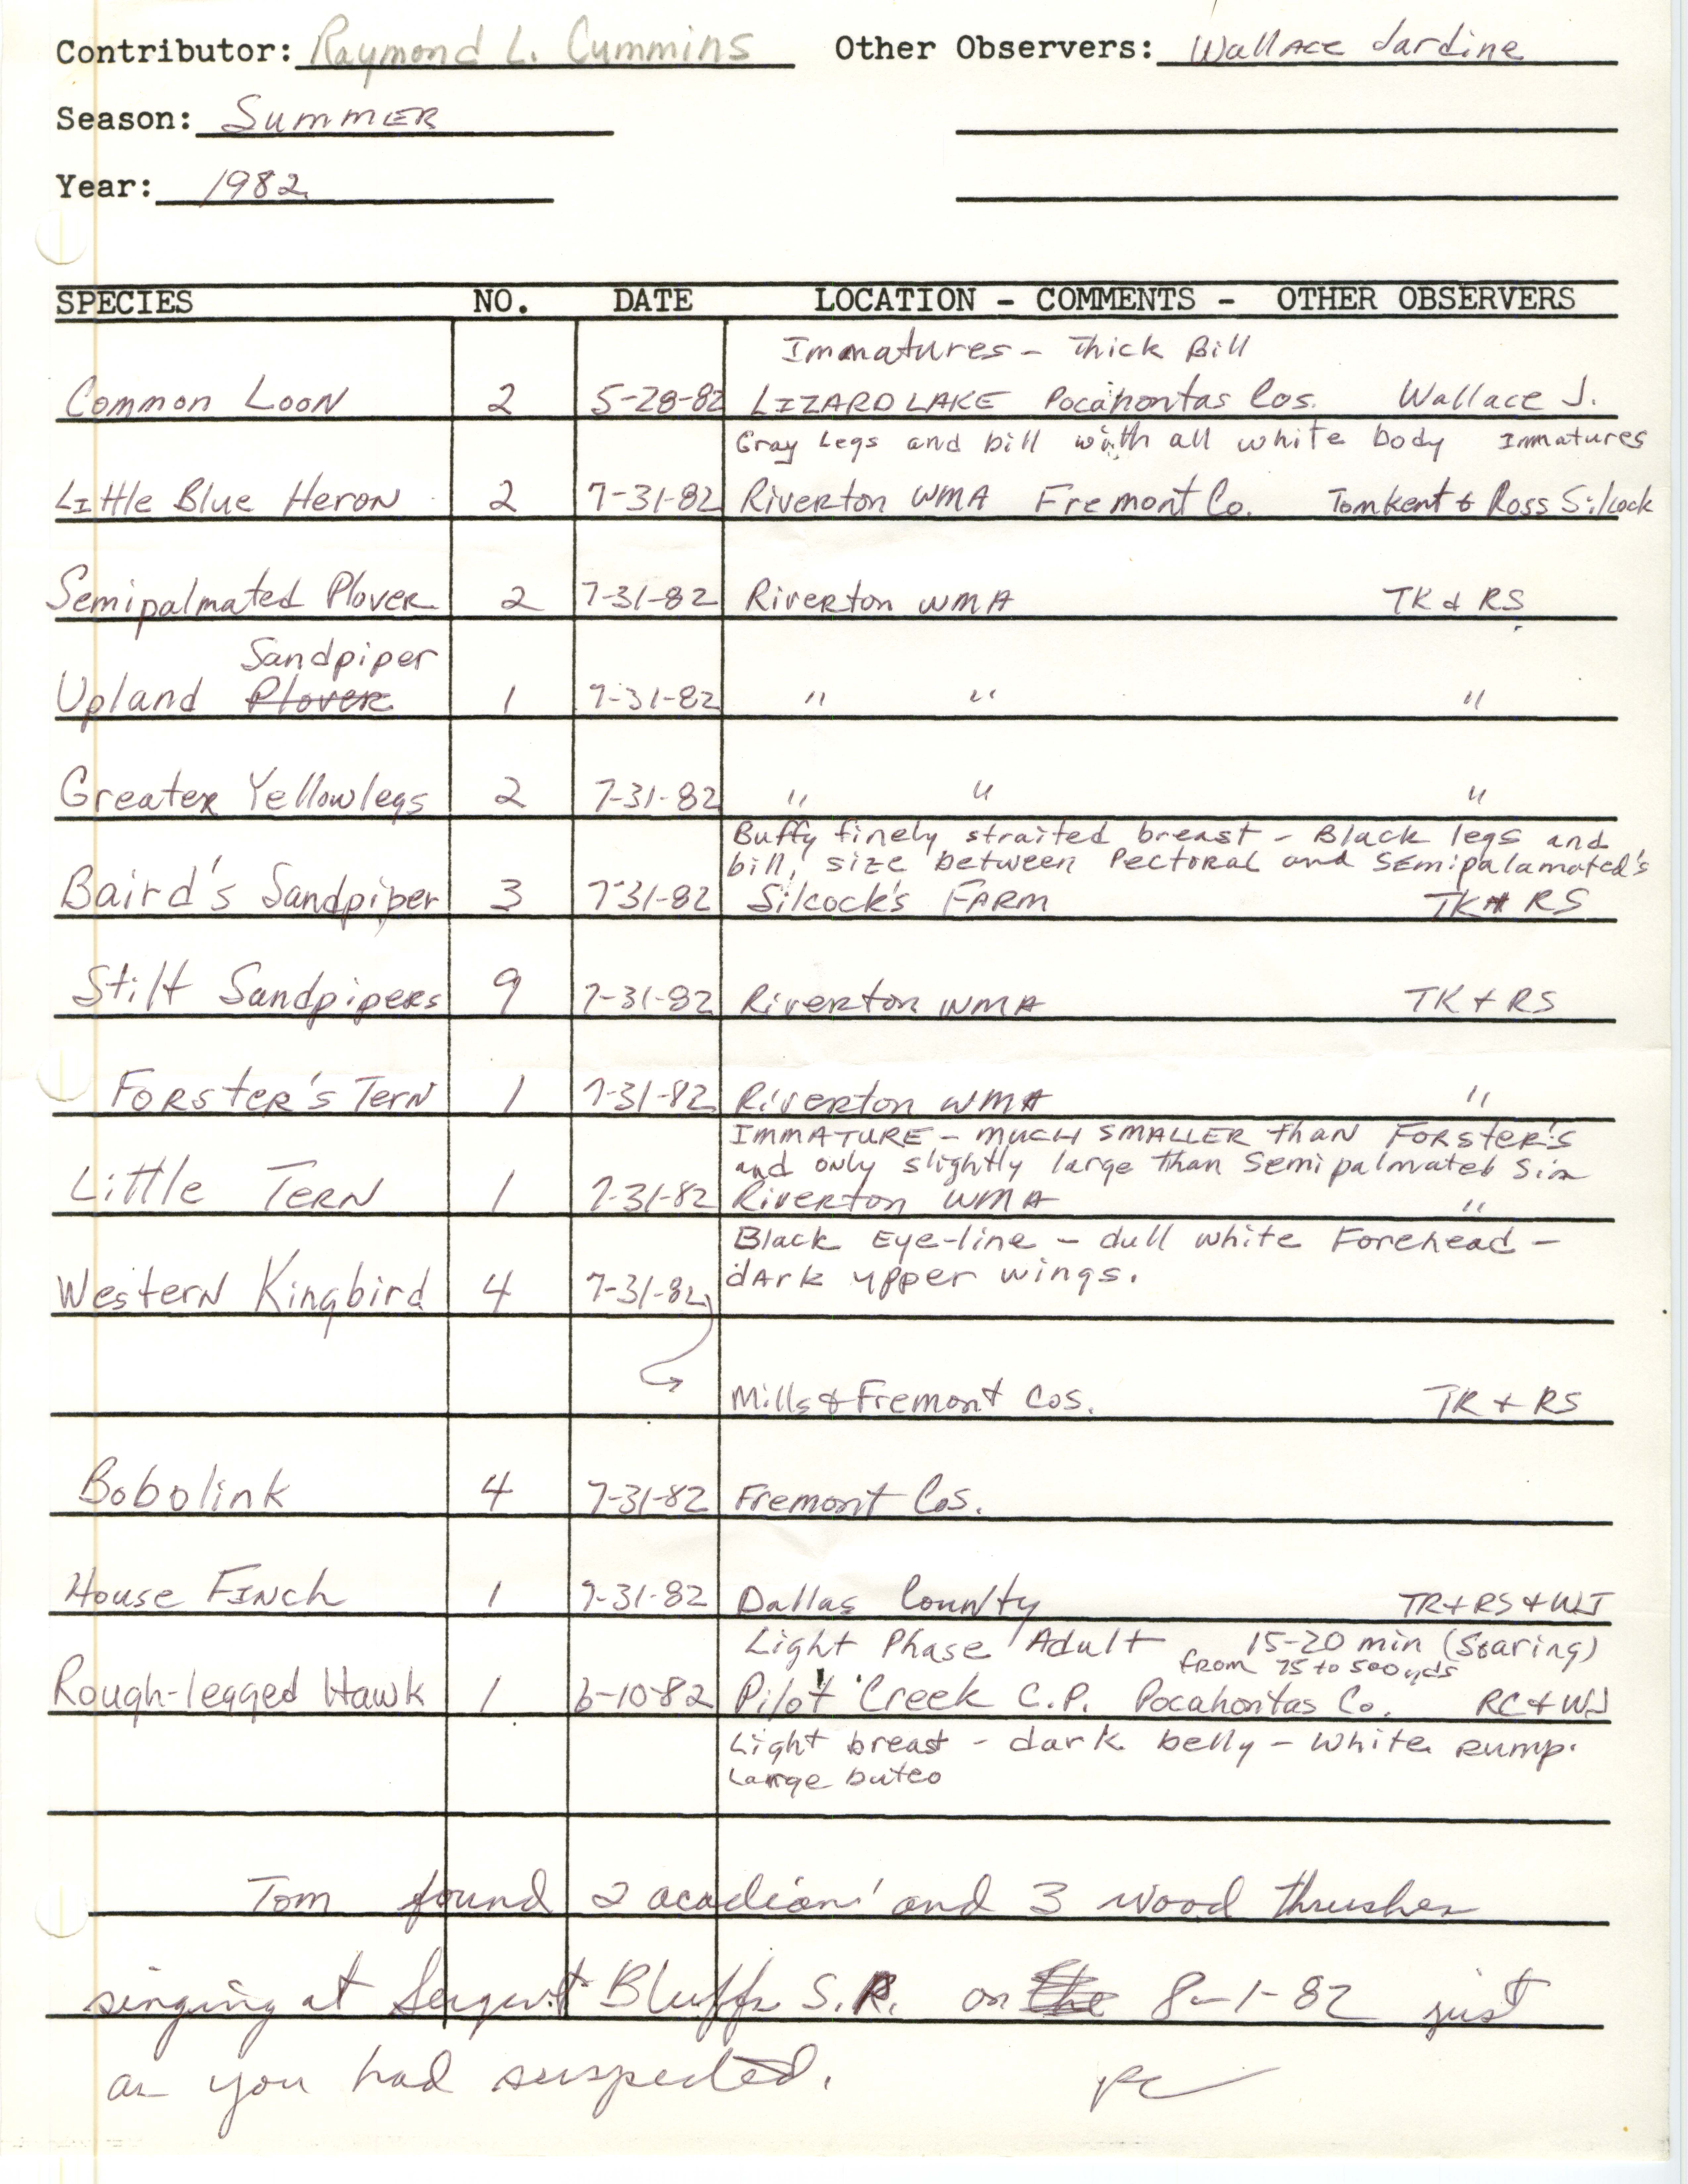 Field report contributed by Raymond L. Cummins, summer 1982